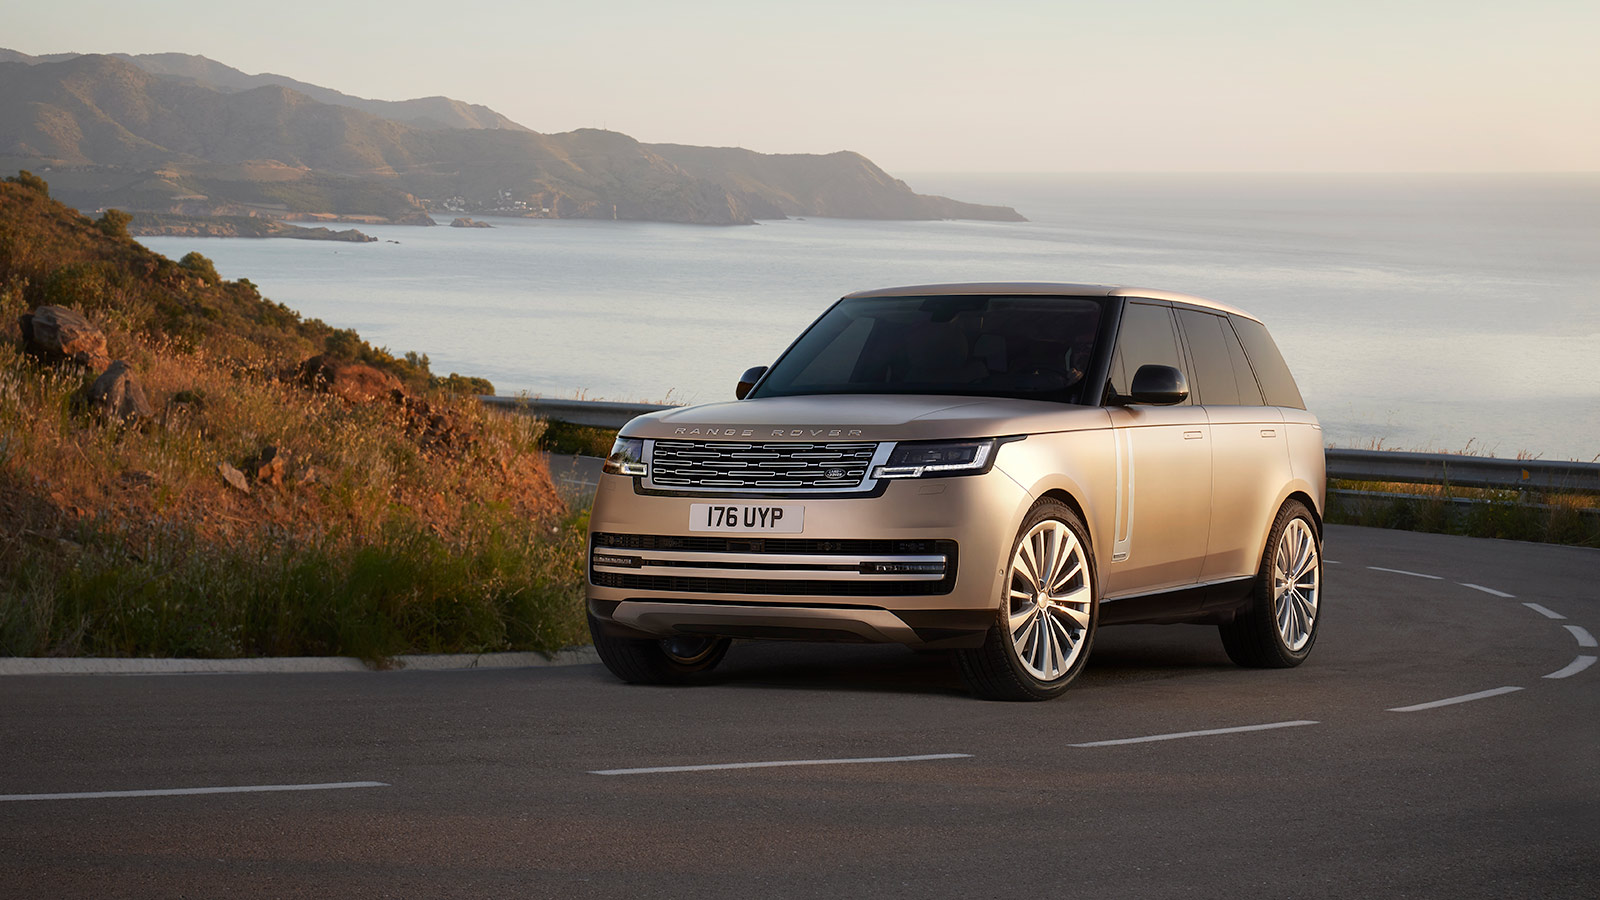 The wait is over, for the all new Range Rover !